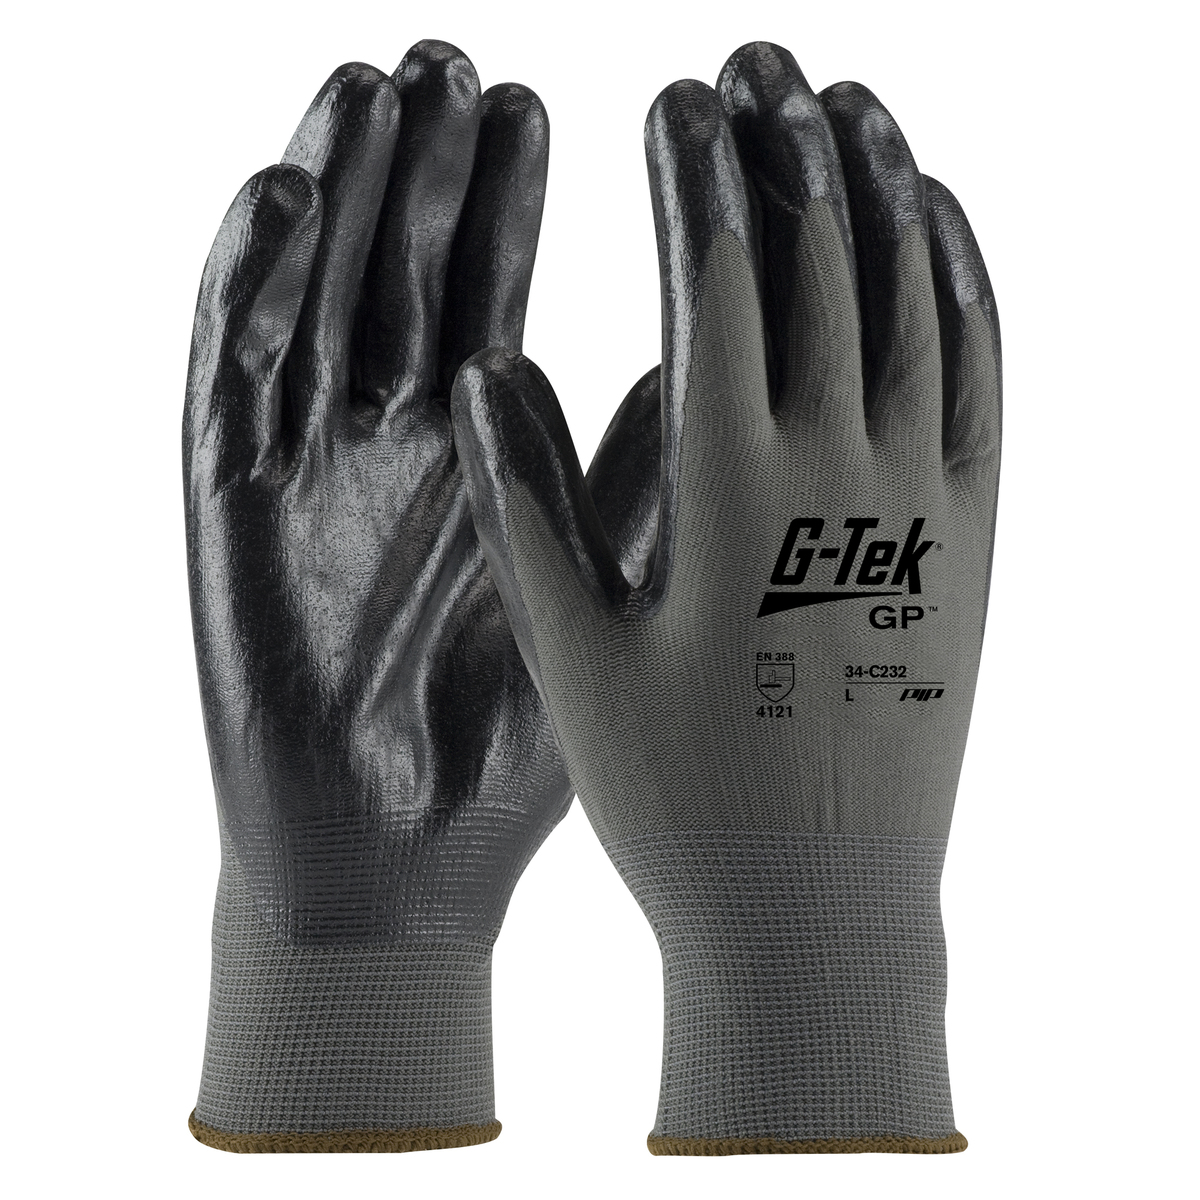 PIP® X-Large G-Tek® GP™ 13 Gauge Black Nitrile Palm And Finger Coated Work Gloves With Nylon Liner And Continuous Knit Wrist